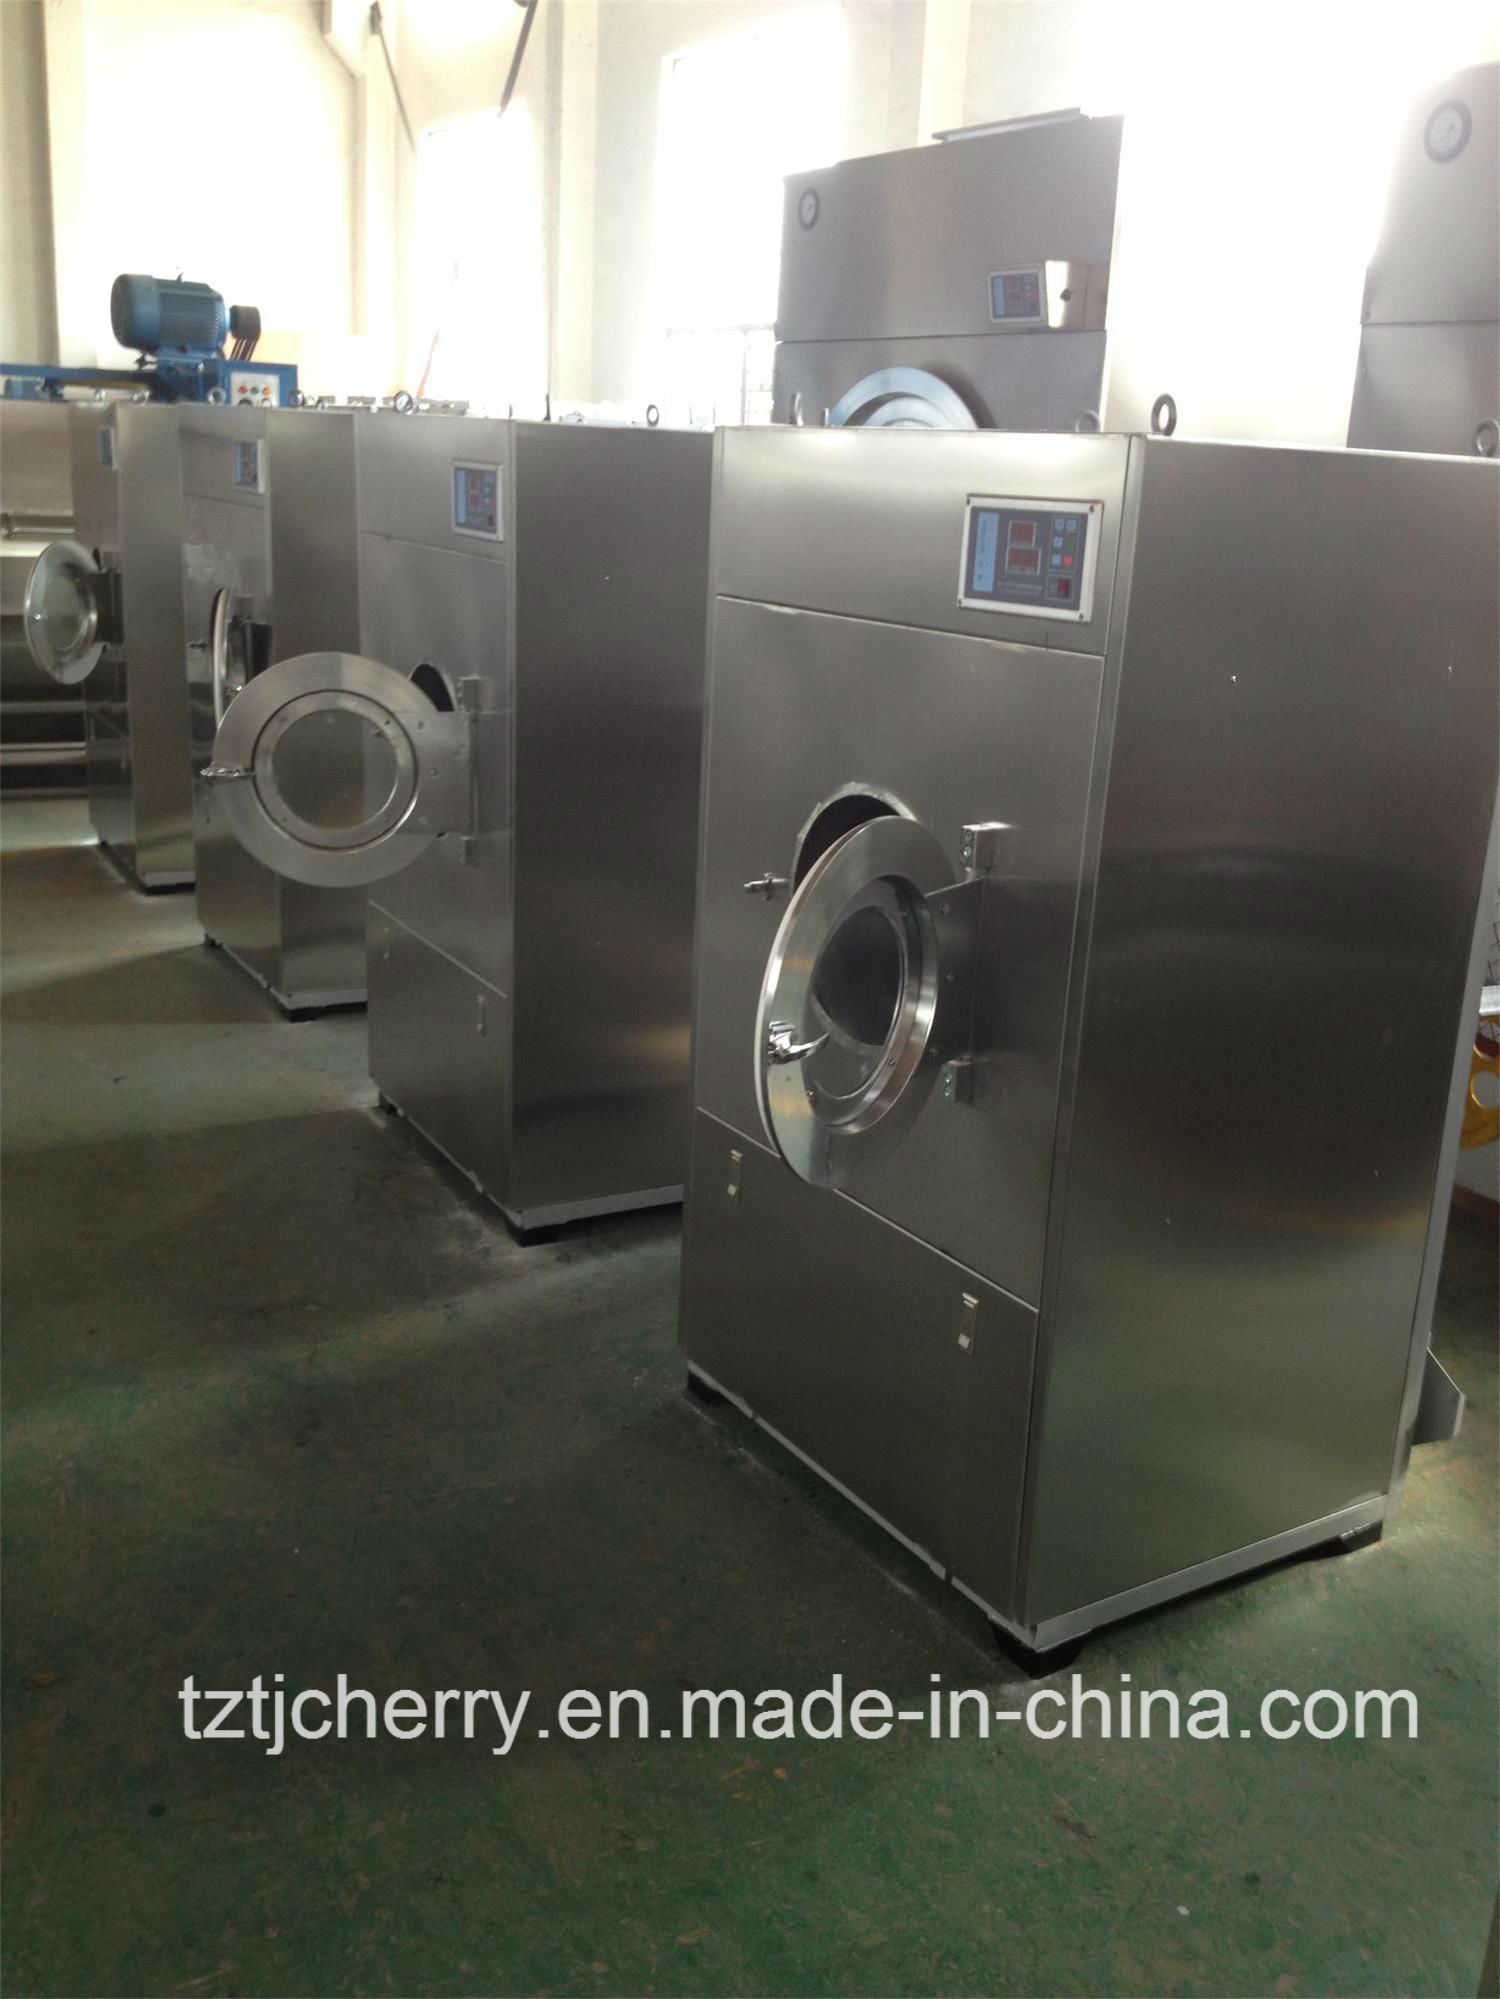 Full Stainless Steel 15kg, 30kg, Clothes Drying Machine/Industrial Clothes Dryer/ Dryer Machine for Industry